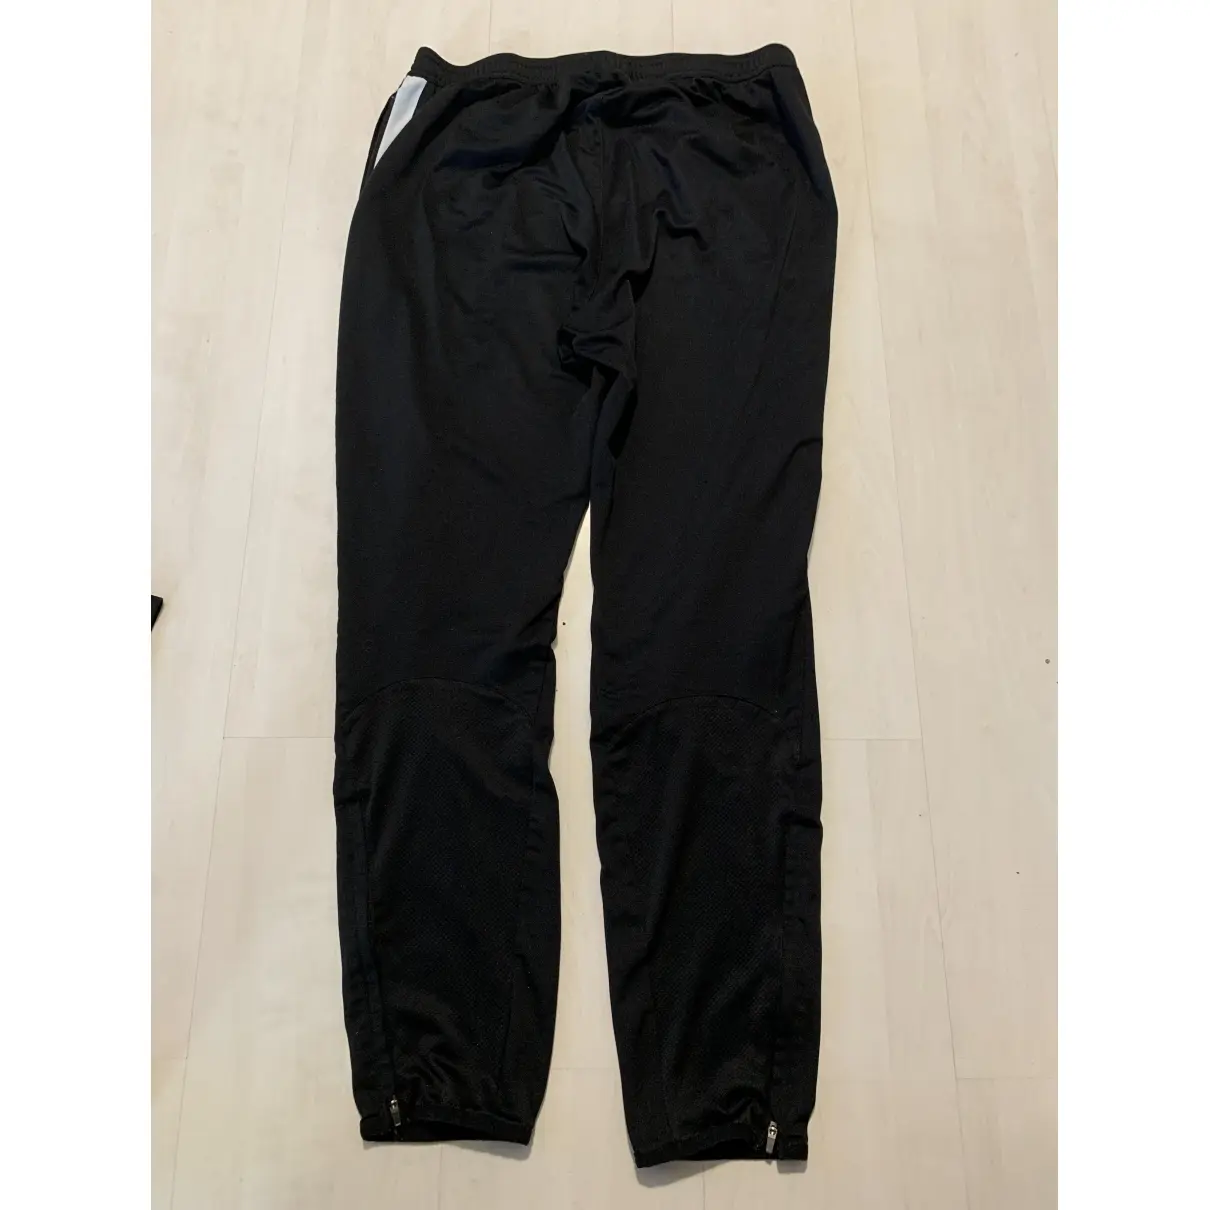 Nike Trousers for sale